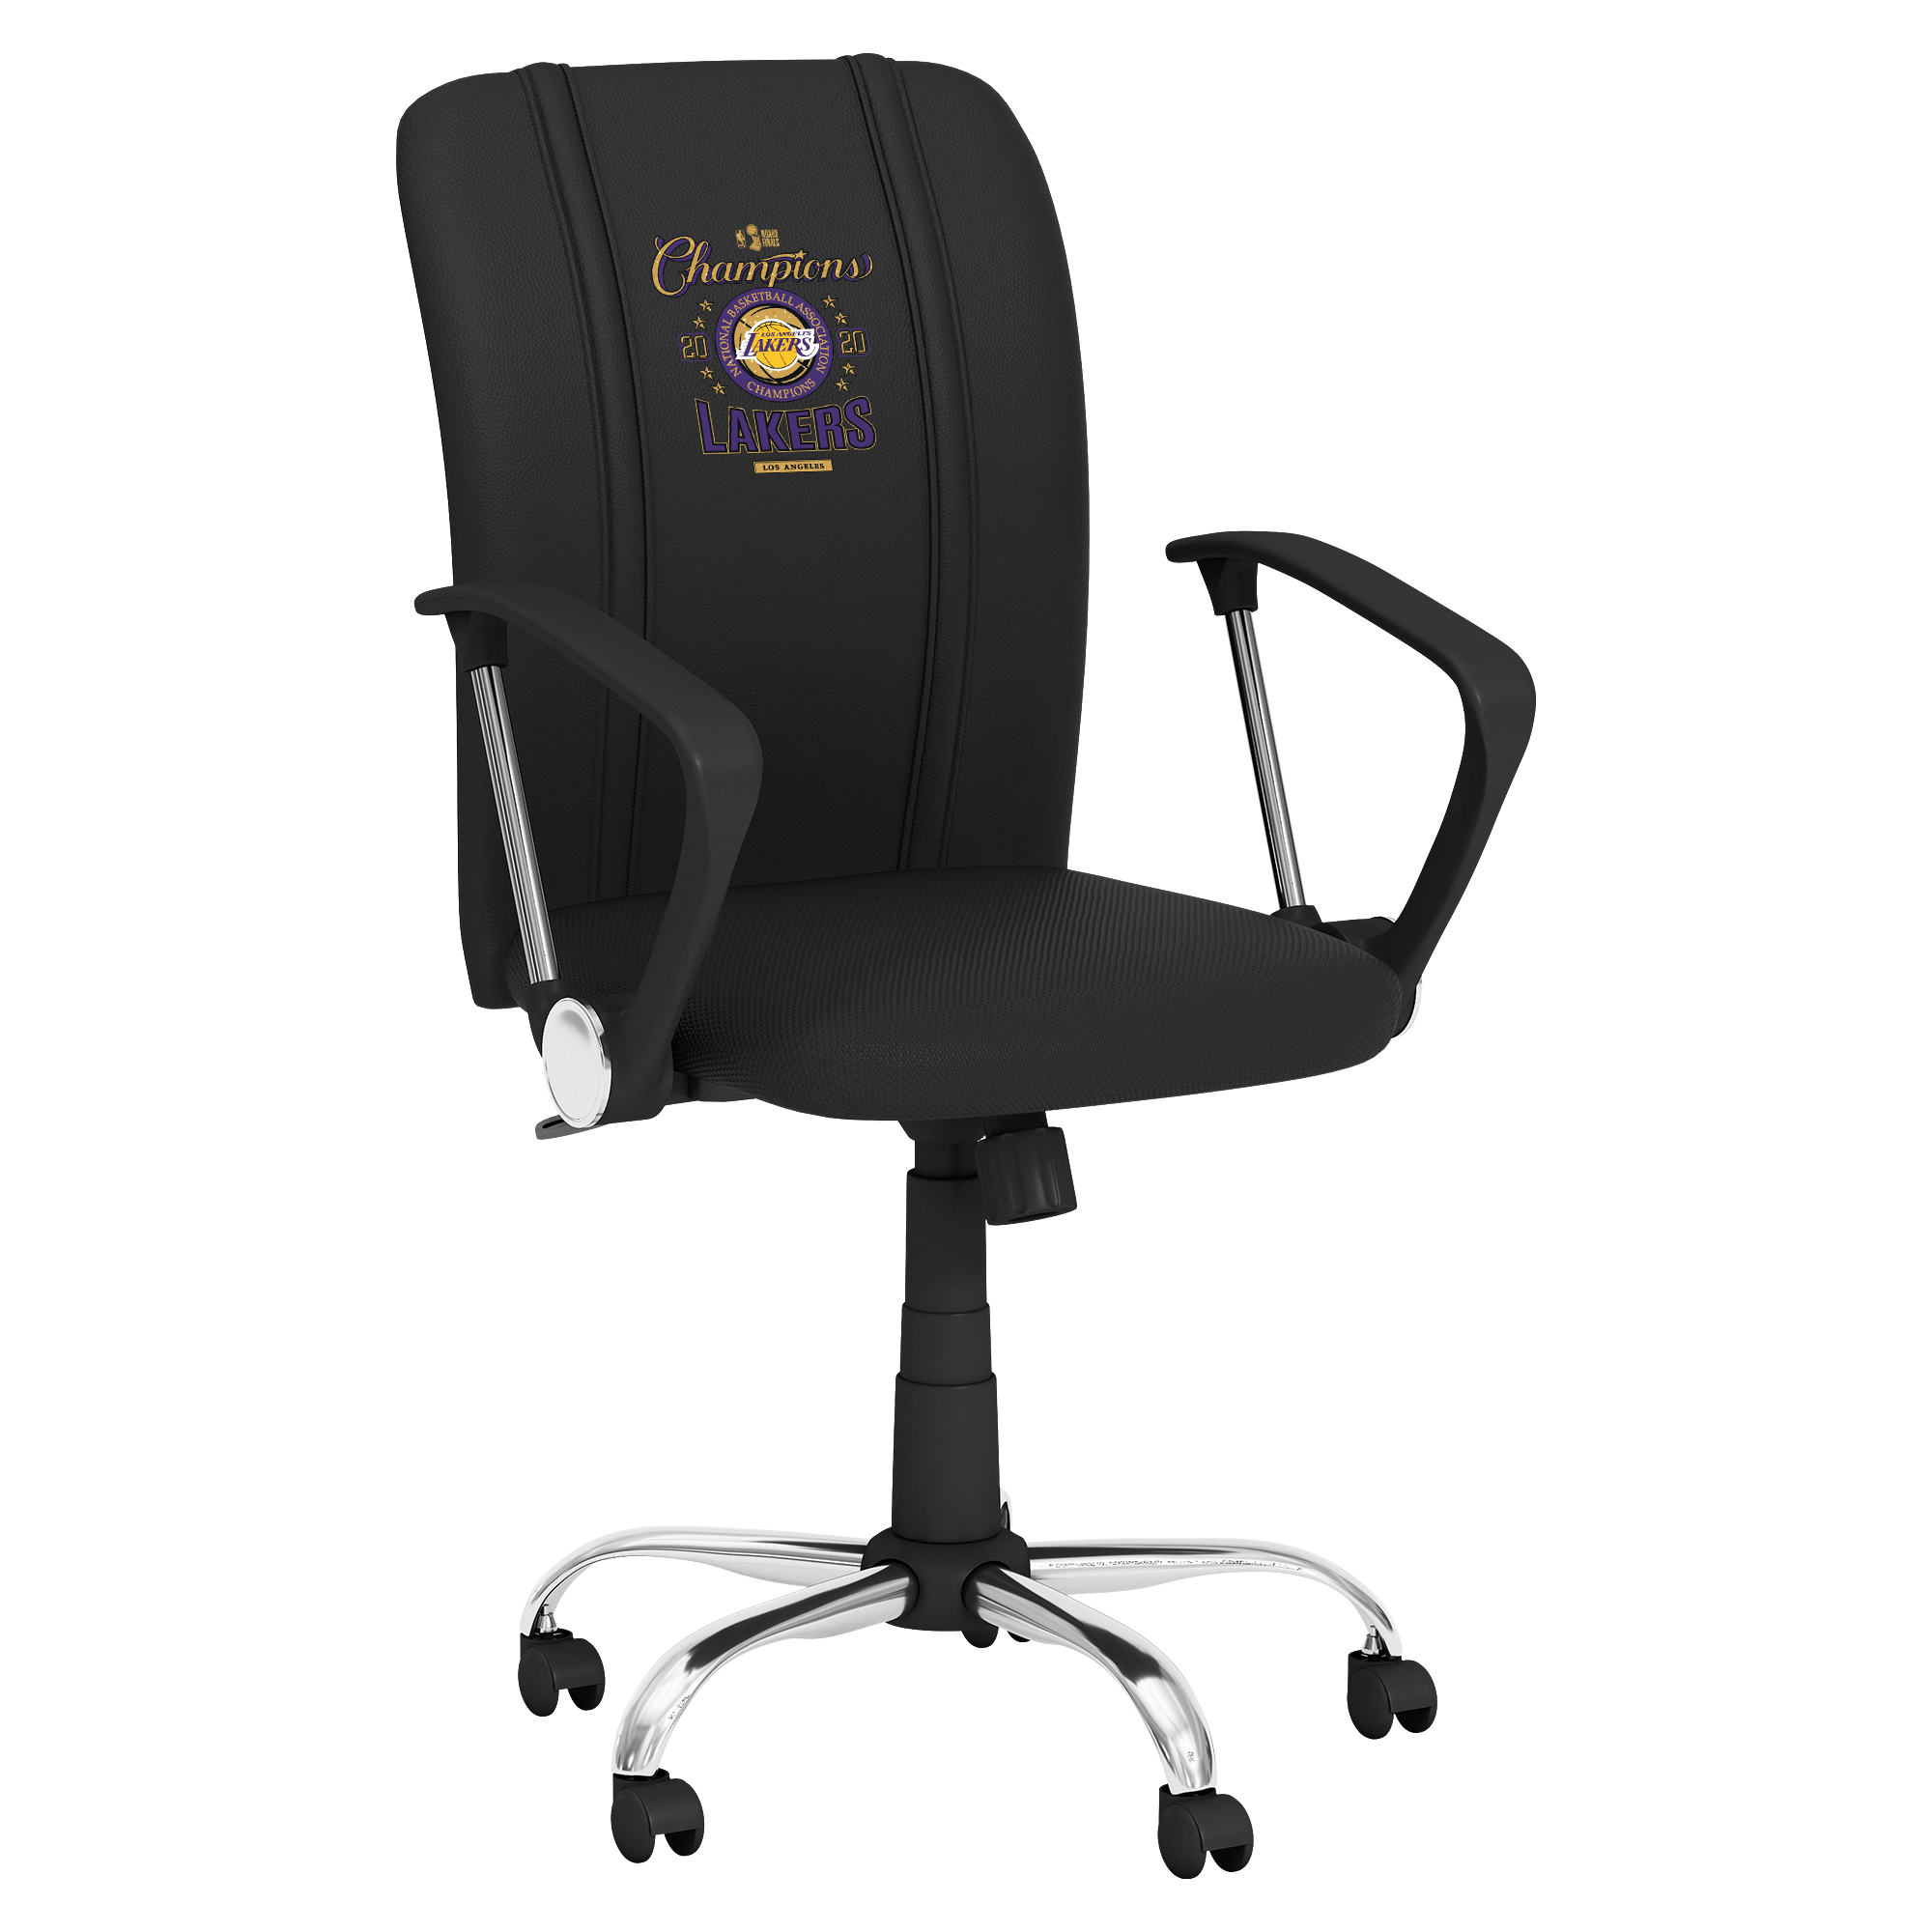 Los Angeles Lakers Curve Task Chair with Los Angeles Lakers 2020 Champions Logo